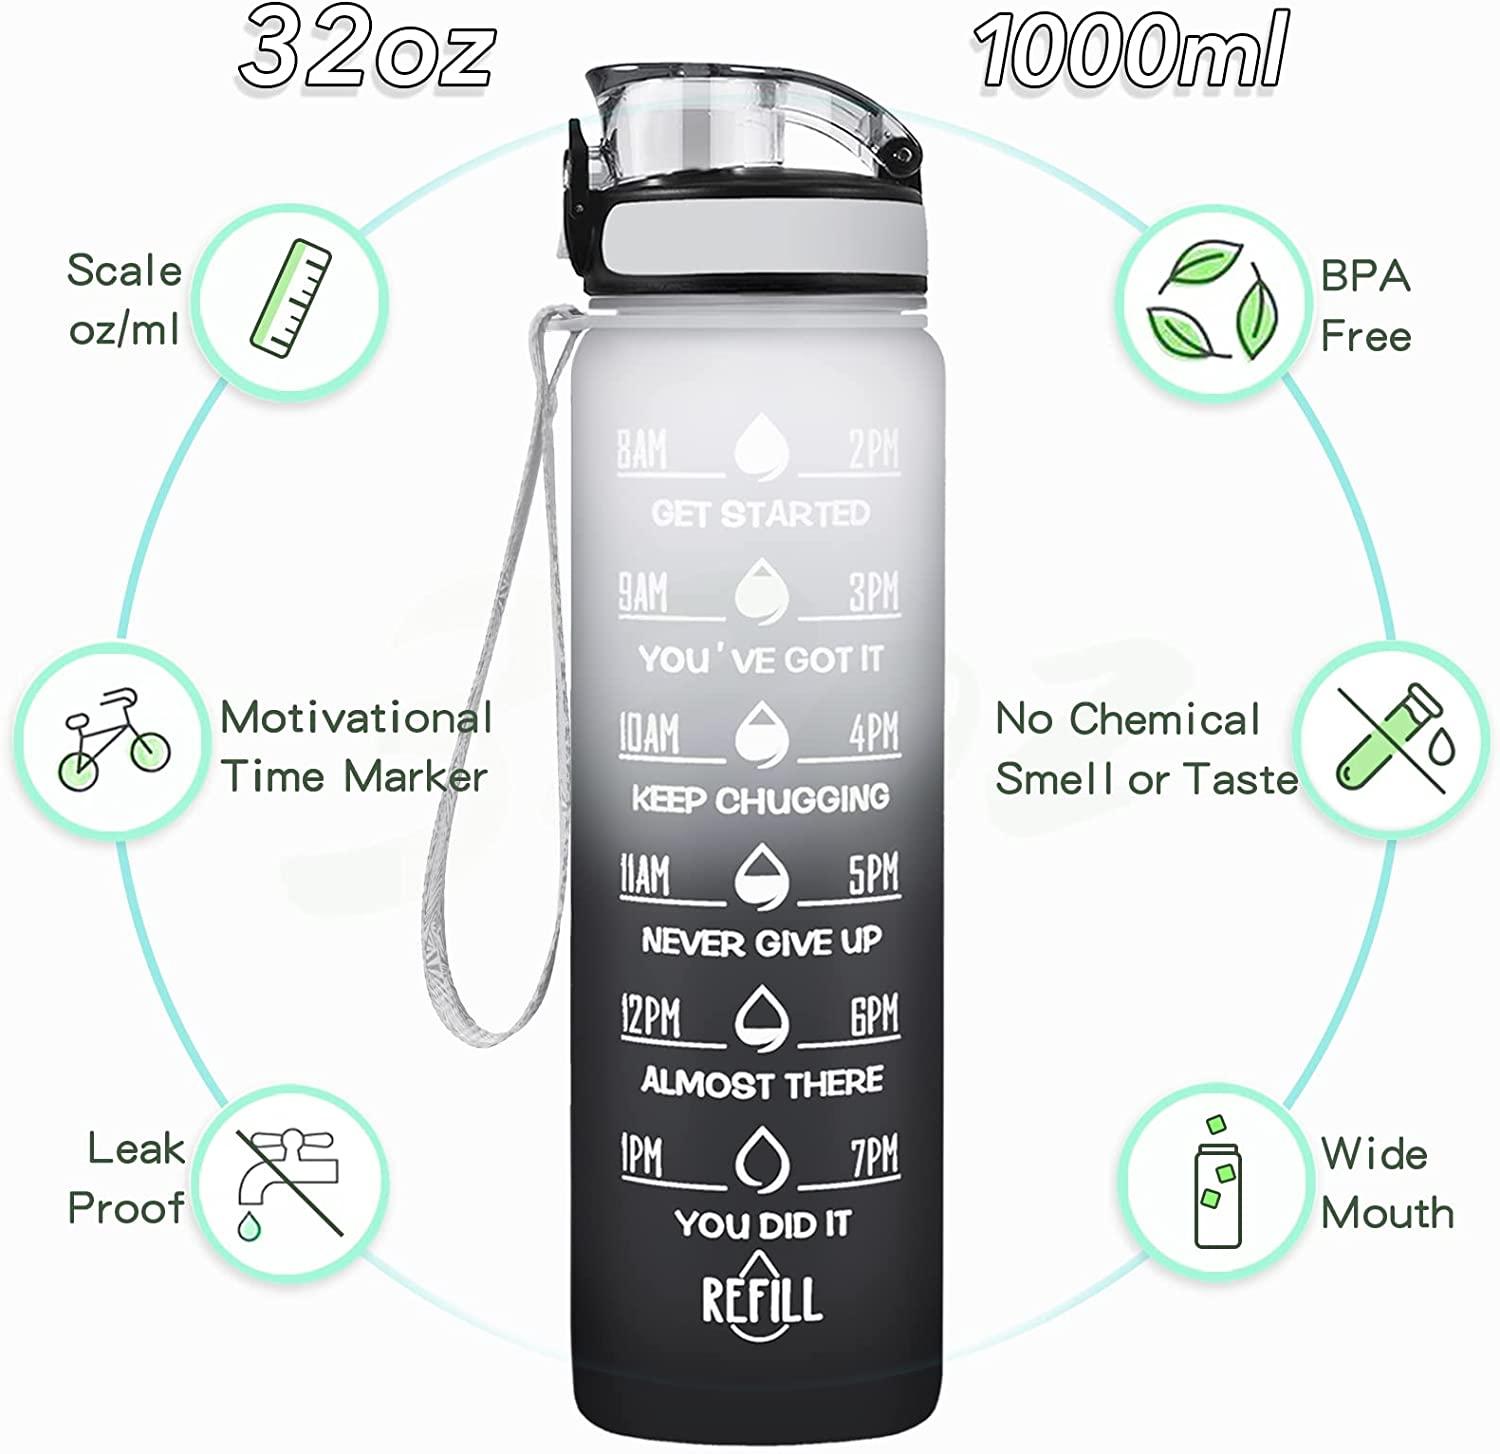 Enerbone 32 OZ Water Bottle, Leakproof BPA & Toxic Free, Motivational Water  Bottle with Times to Drink and Straw, Fitness Sports Water Bottle with  Strap for Office, Gym, Outdoor Sports Gray-Black